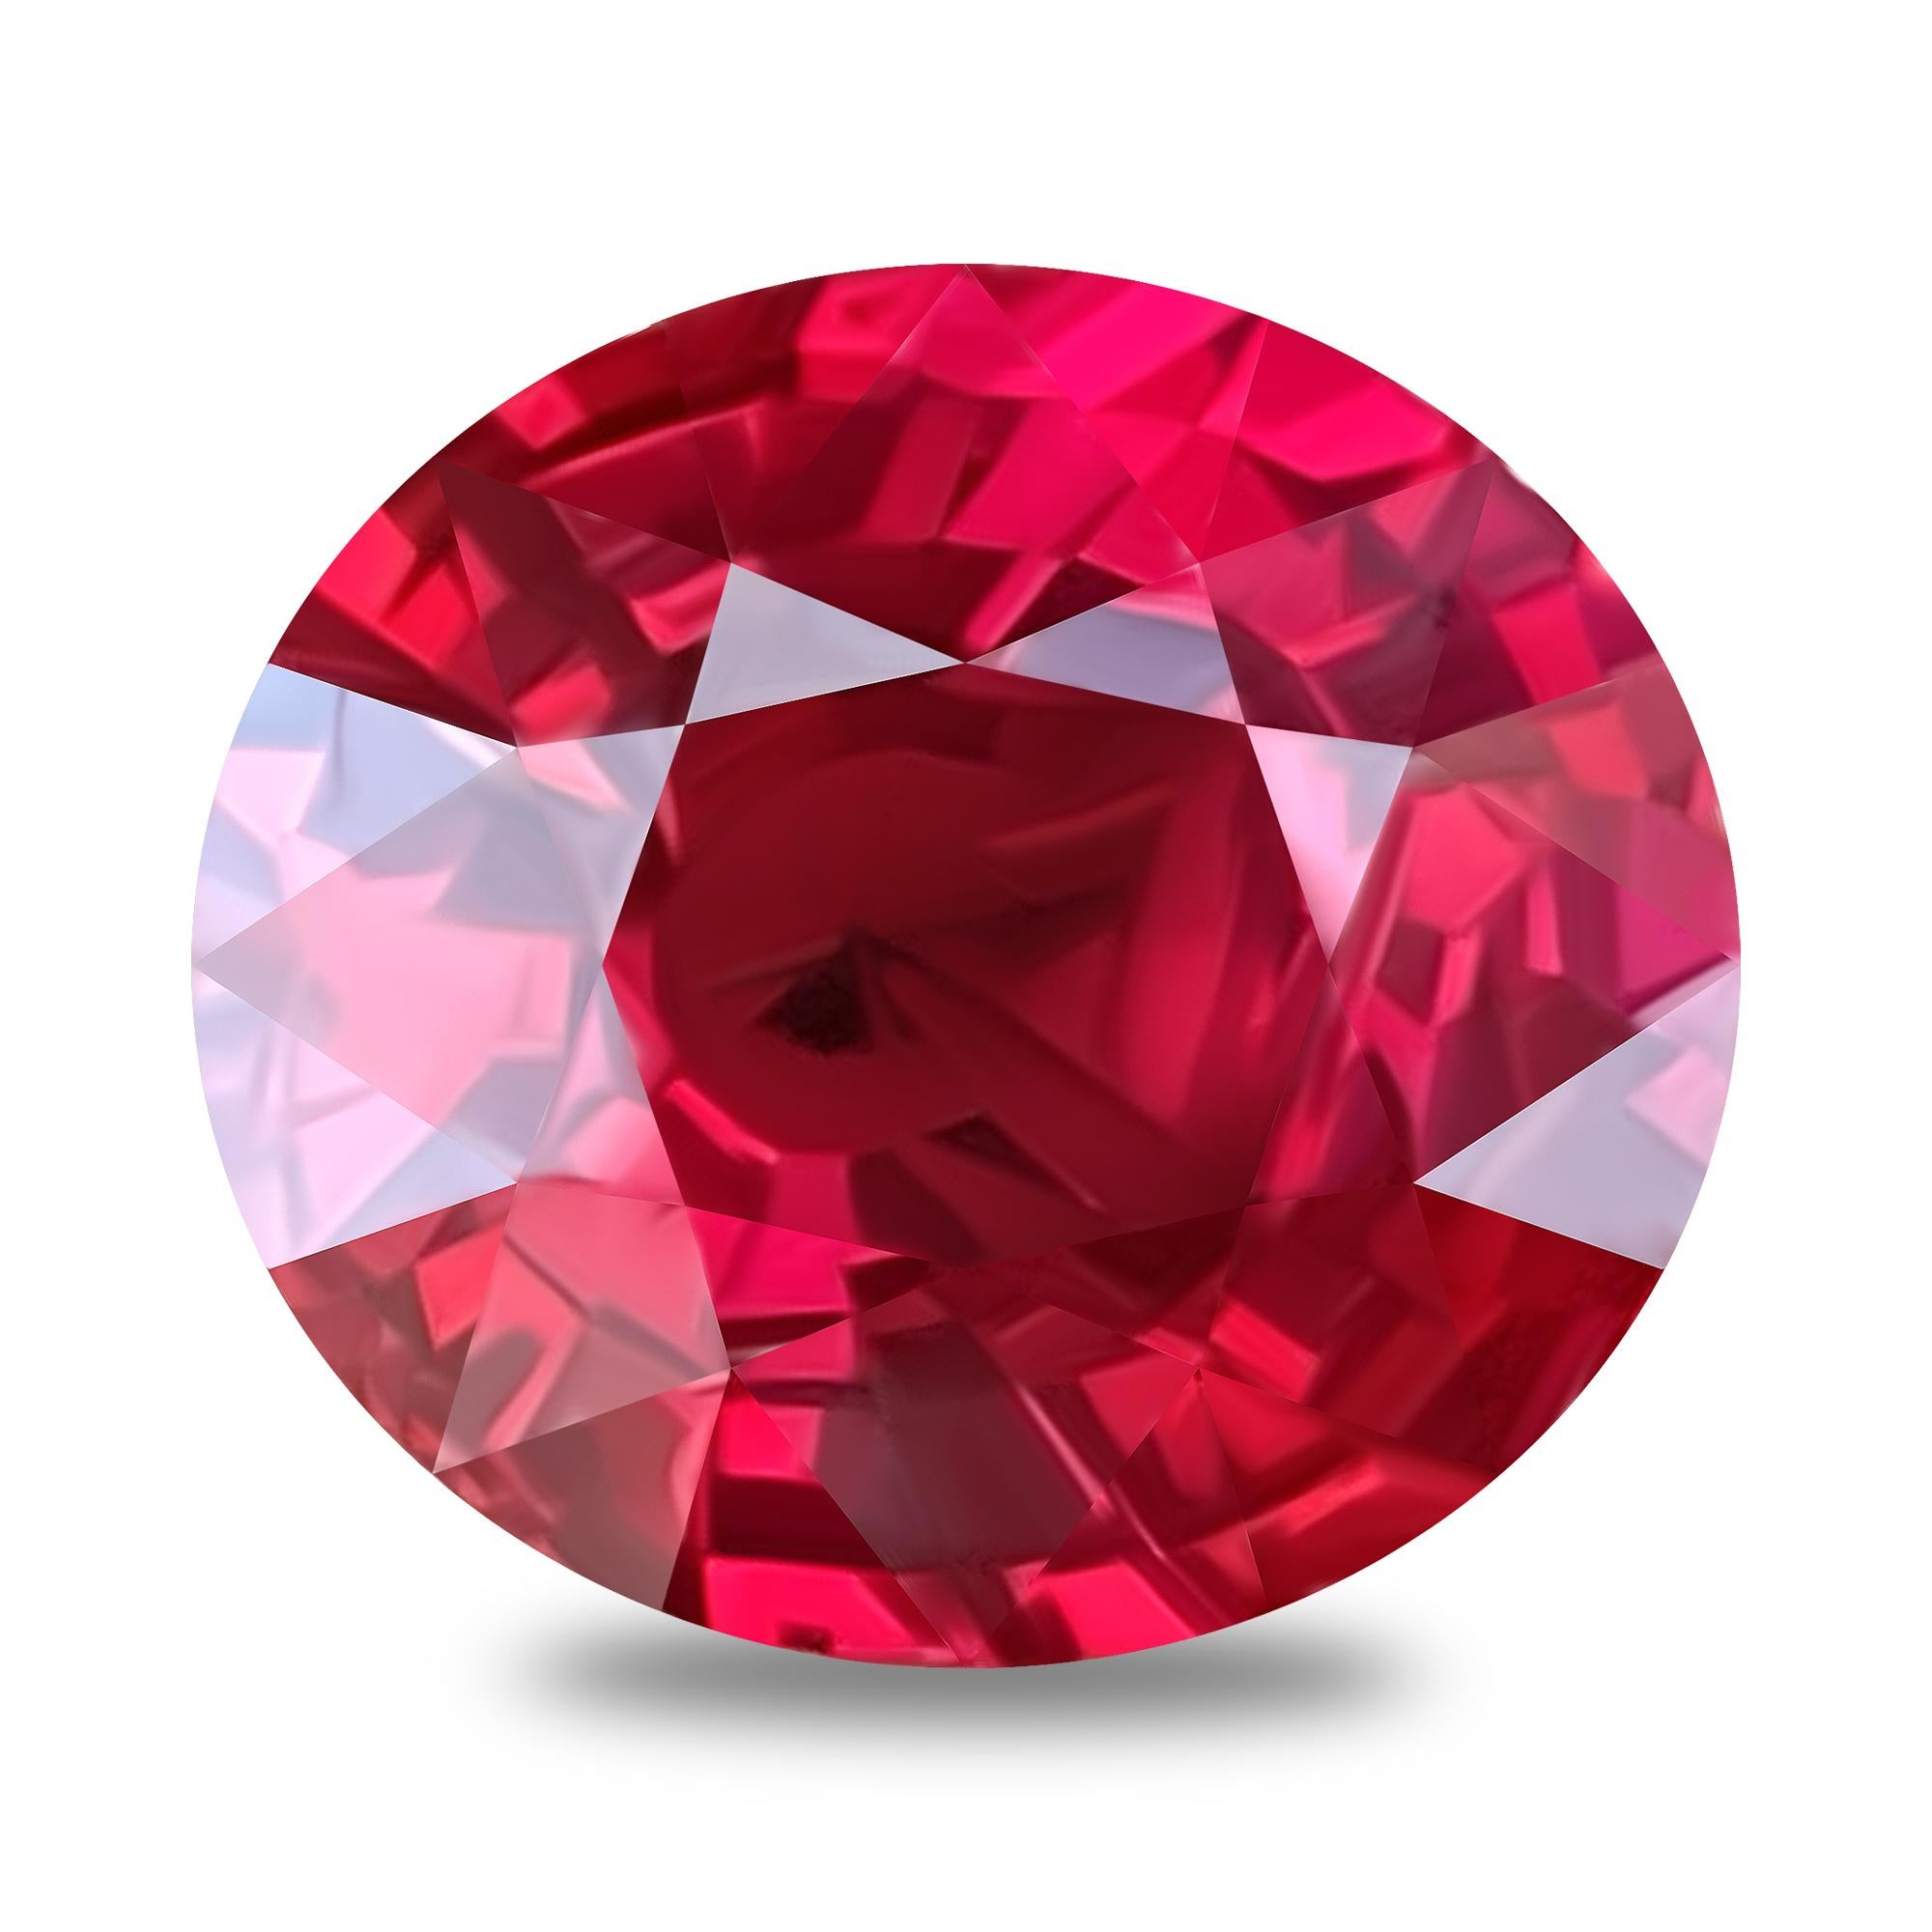 Extremely rare Ruby with fascinating color. 
The stone with such size and quality is now simply impossible to find on the market. 
The price of it is growing every week. 
This ruby could be marked as excellent investment
It is quite big in size, eye